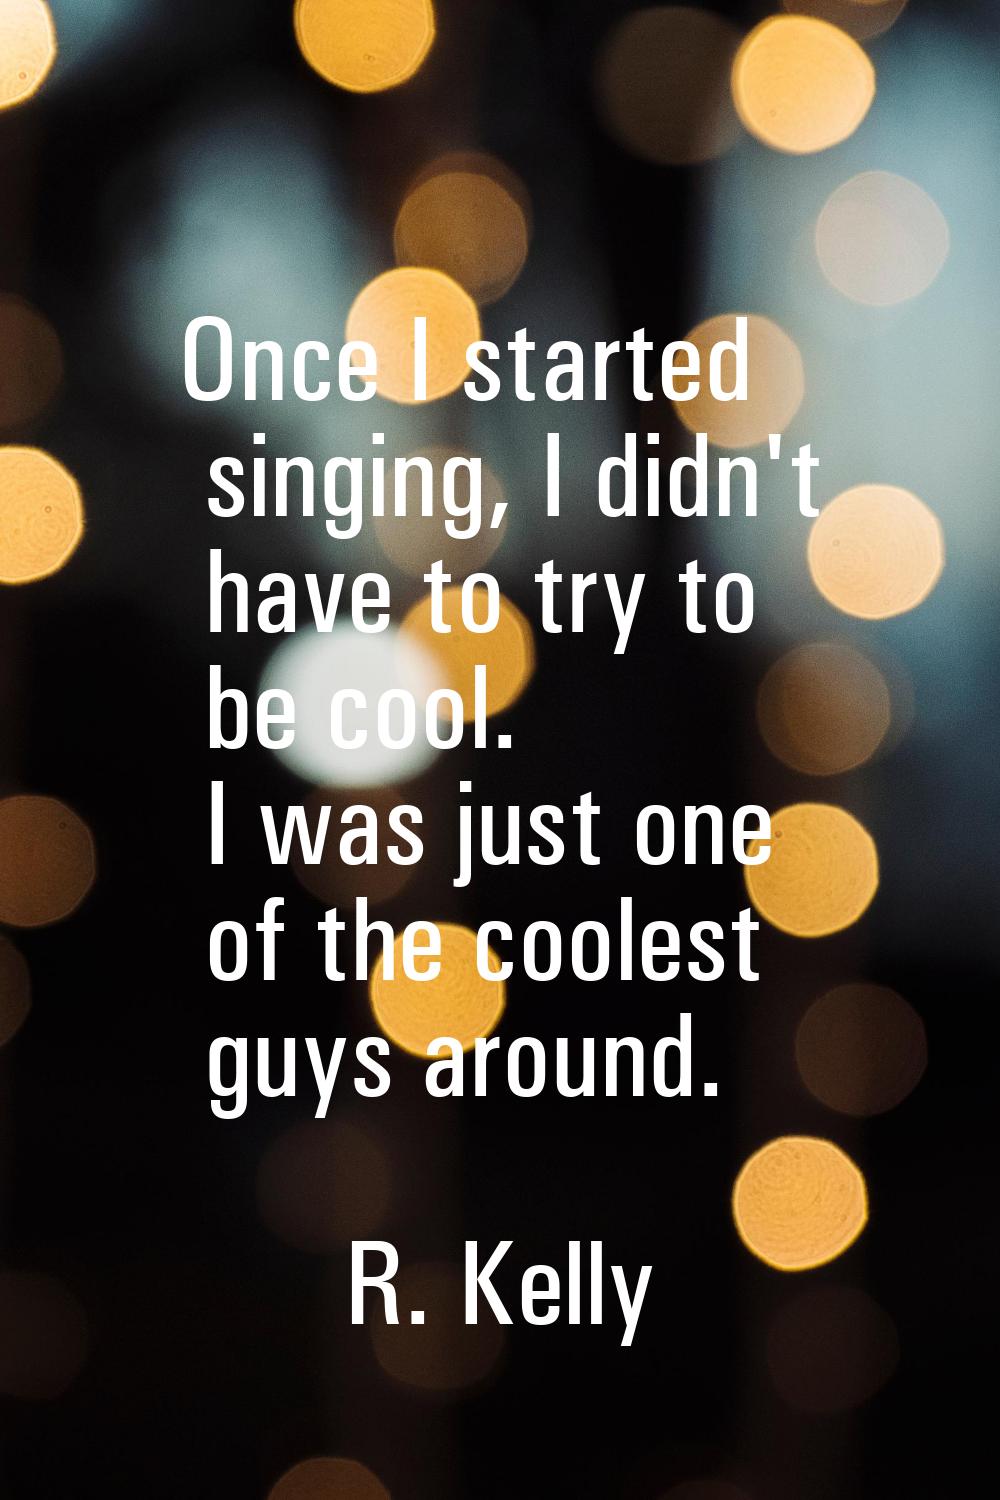 Once I started singing, I didn't have to try to be cool. I was just one of the coolest guys around.